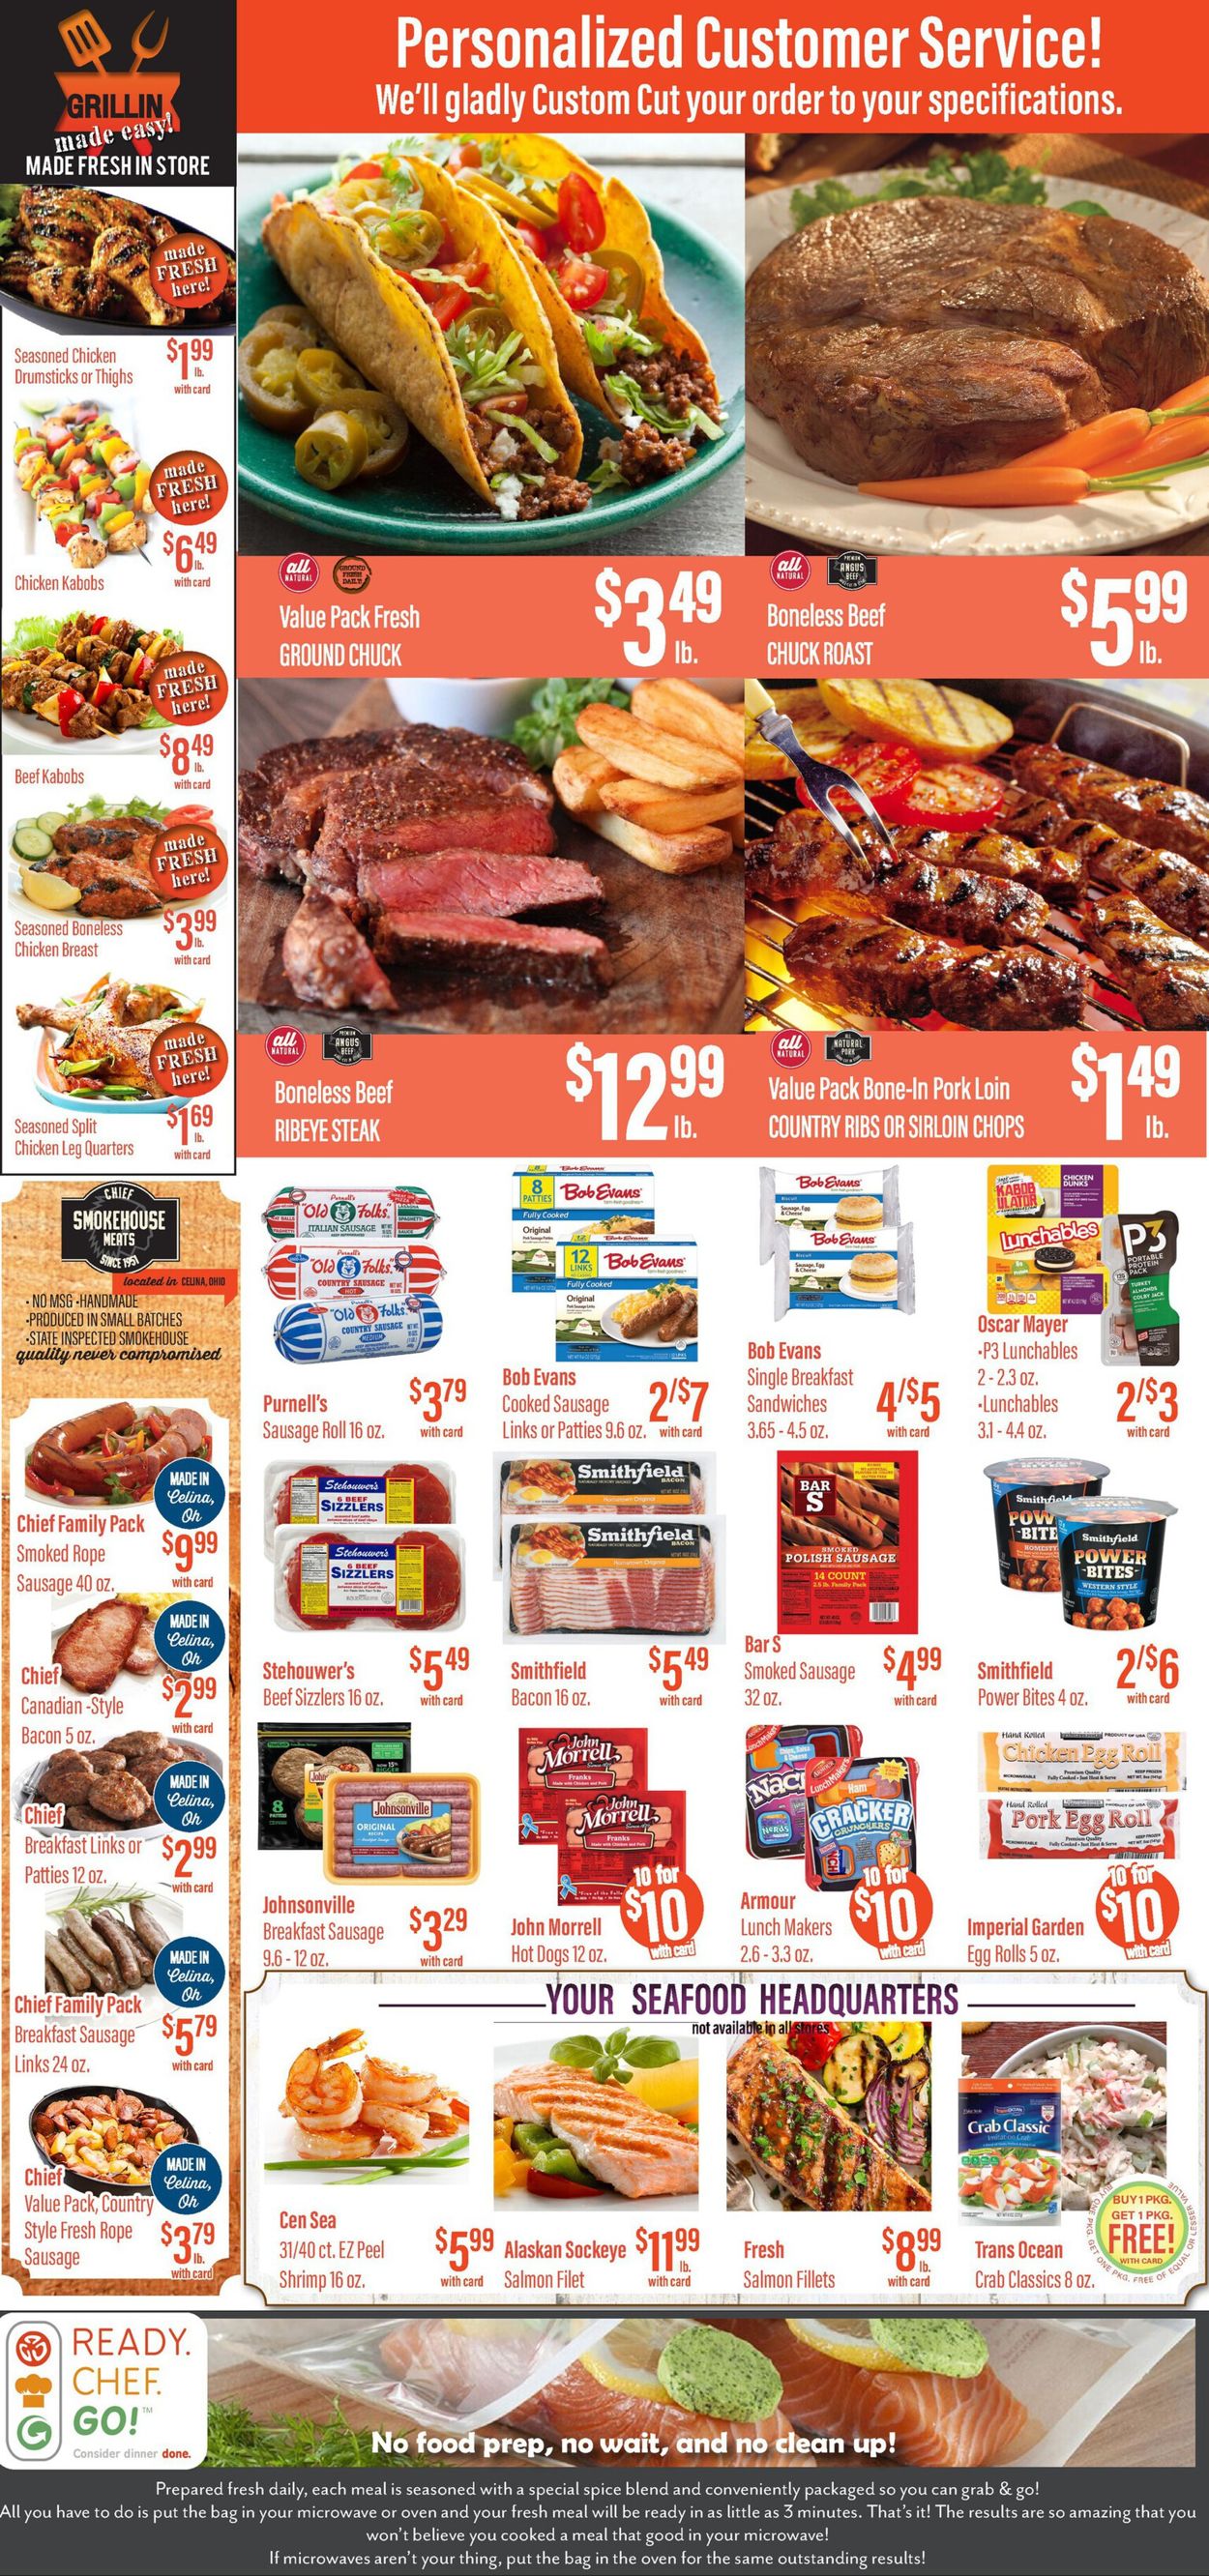 Remke Markets Ad from 04/15/2021